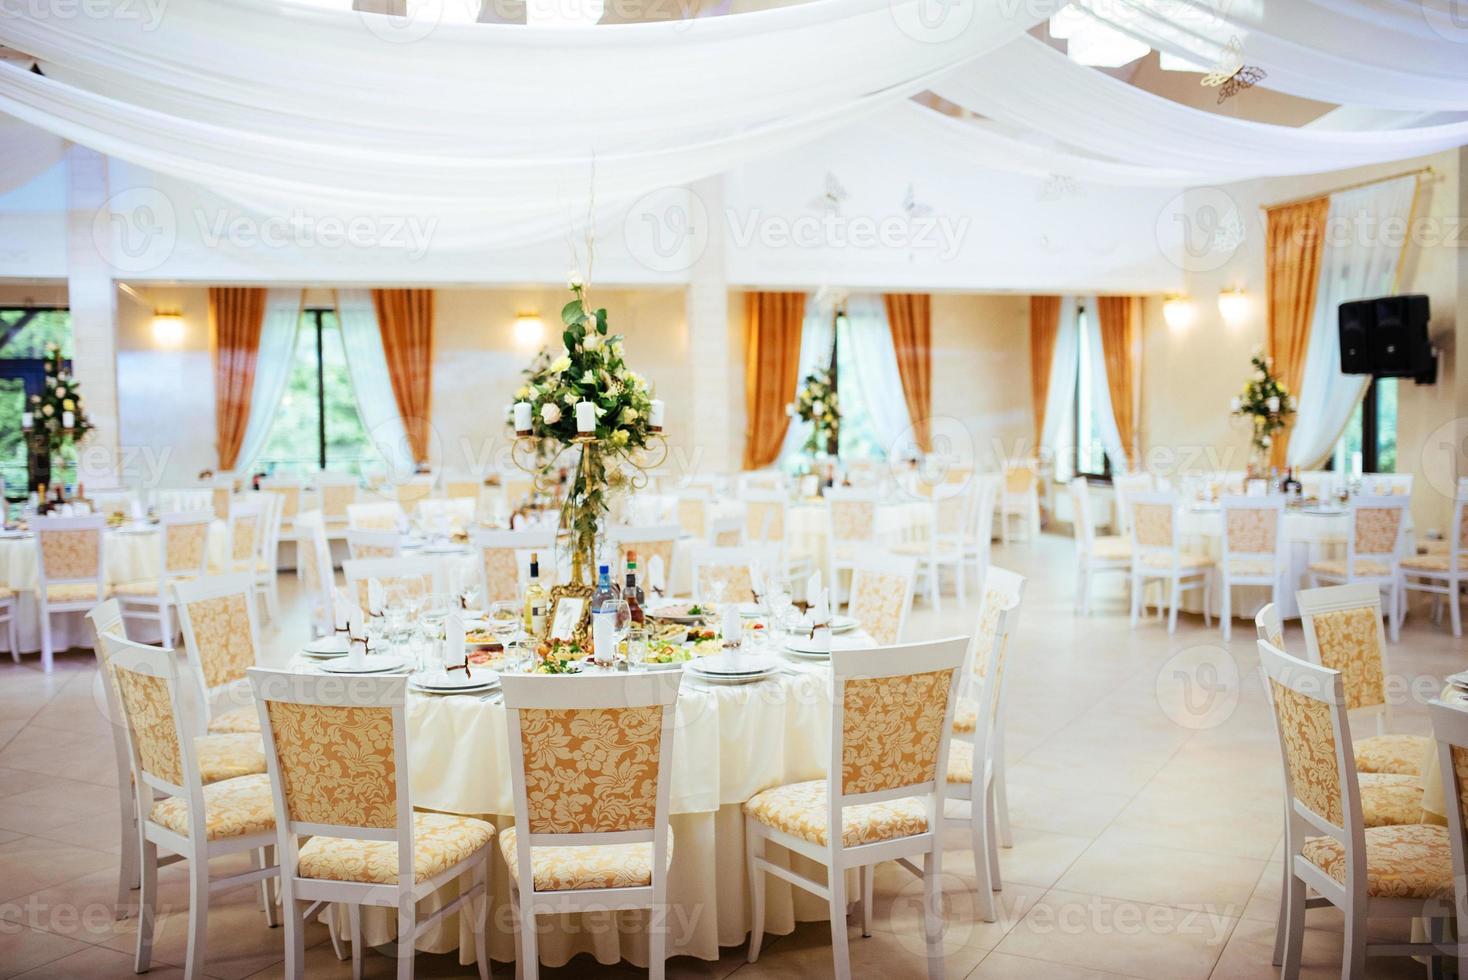 Interior of a wedding tent decoration ready for guests photo